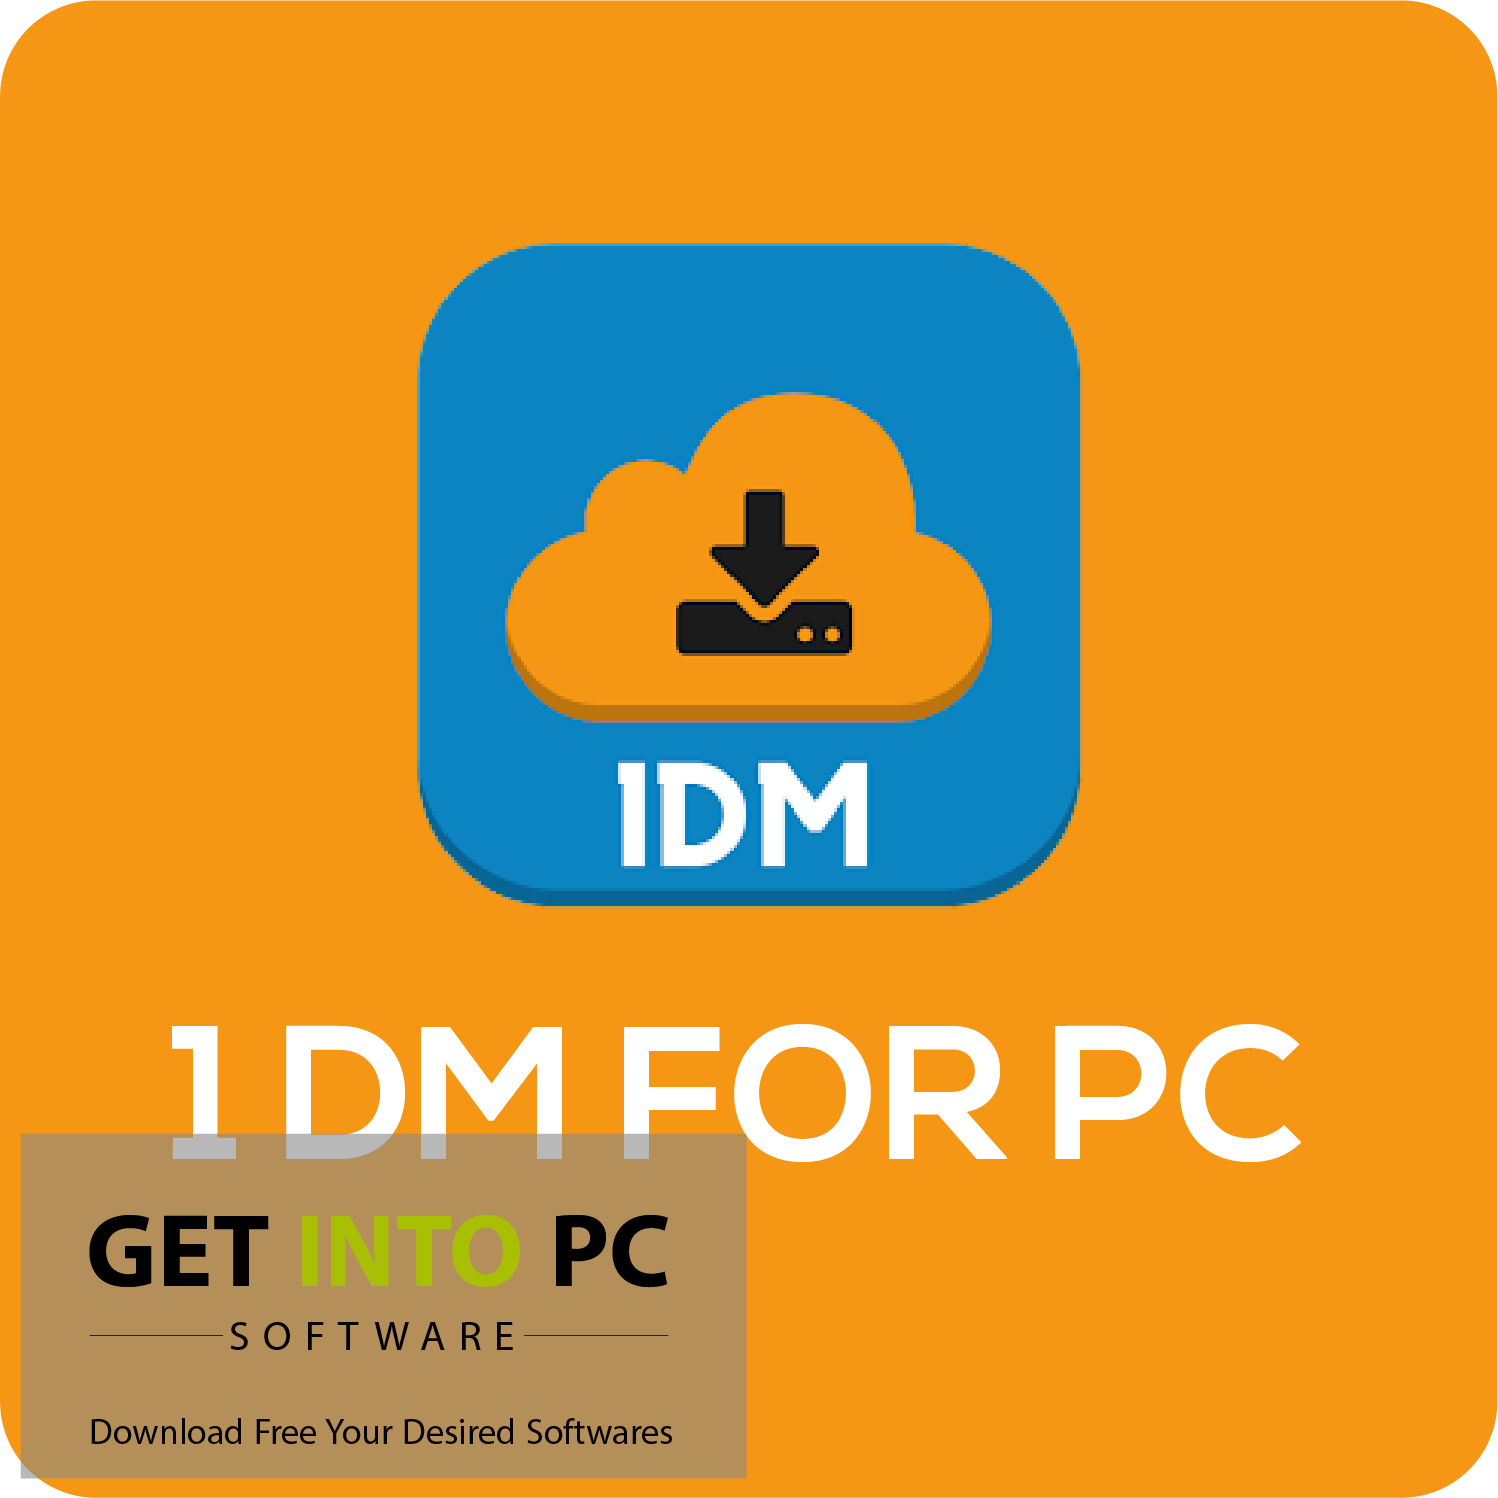 Browsing with 1DM Browser, Download the Latest Version on getintopc.software